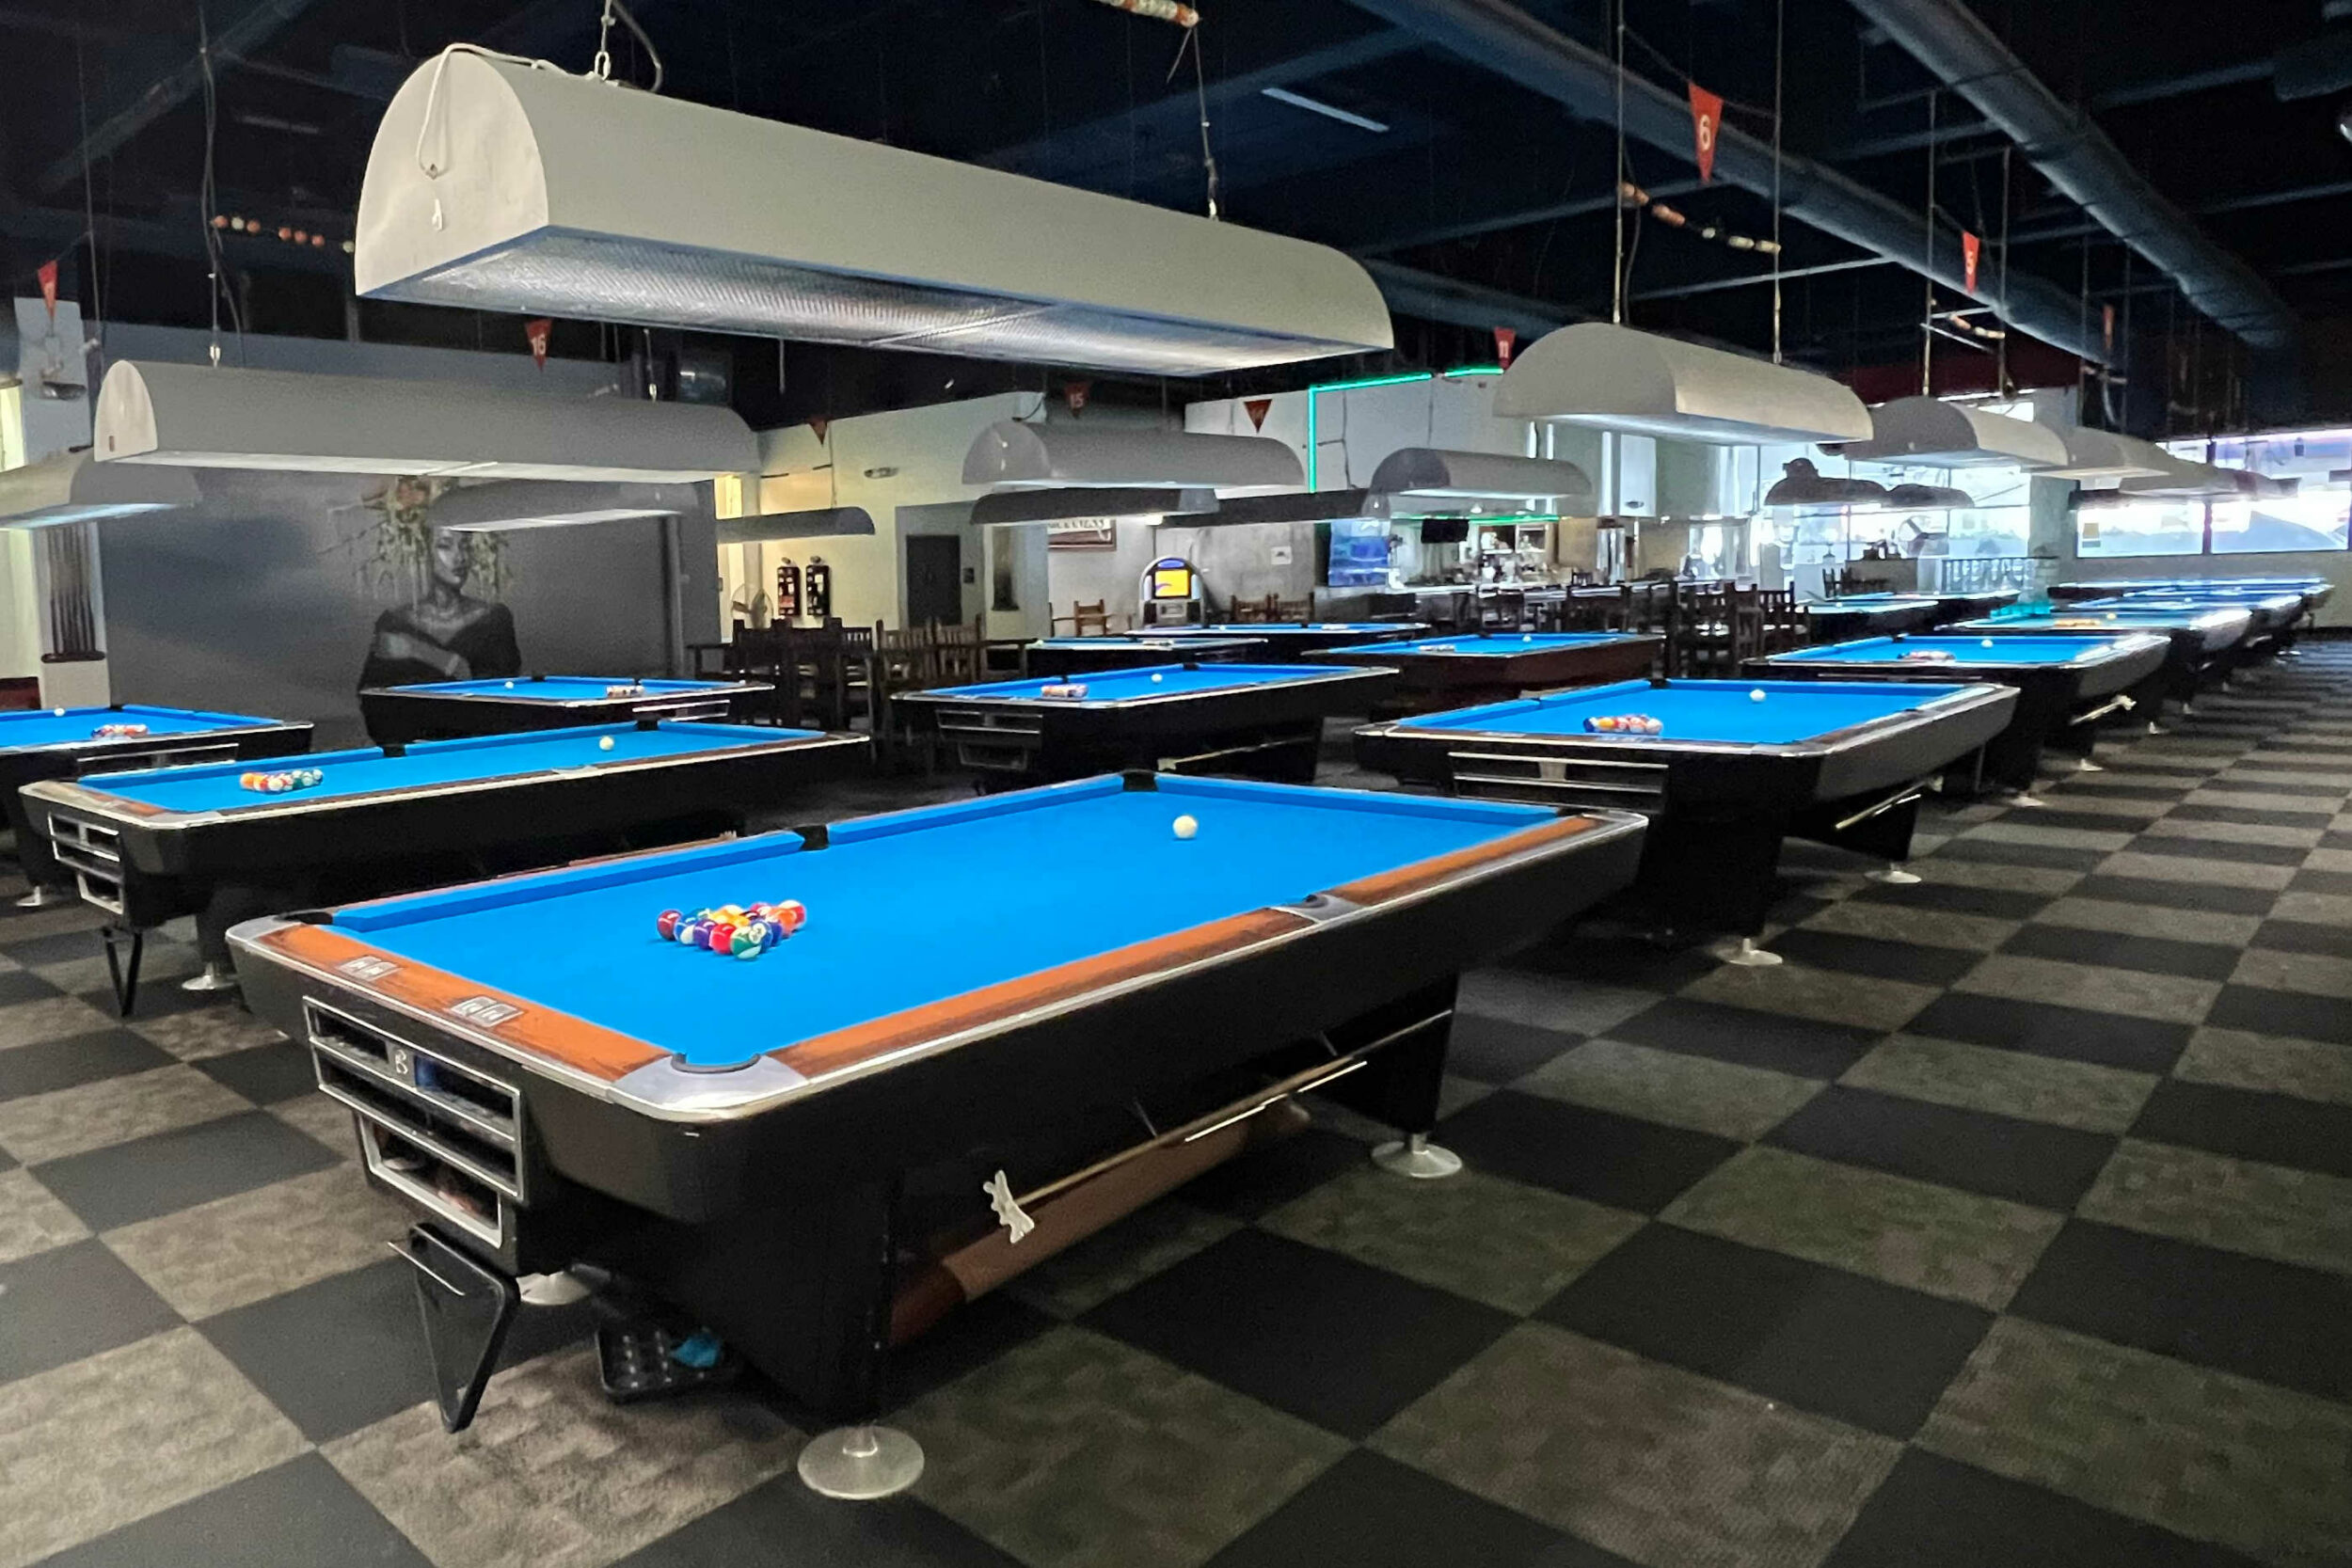 Several billiards tables are lined up in a room.